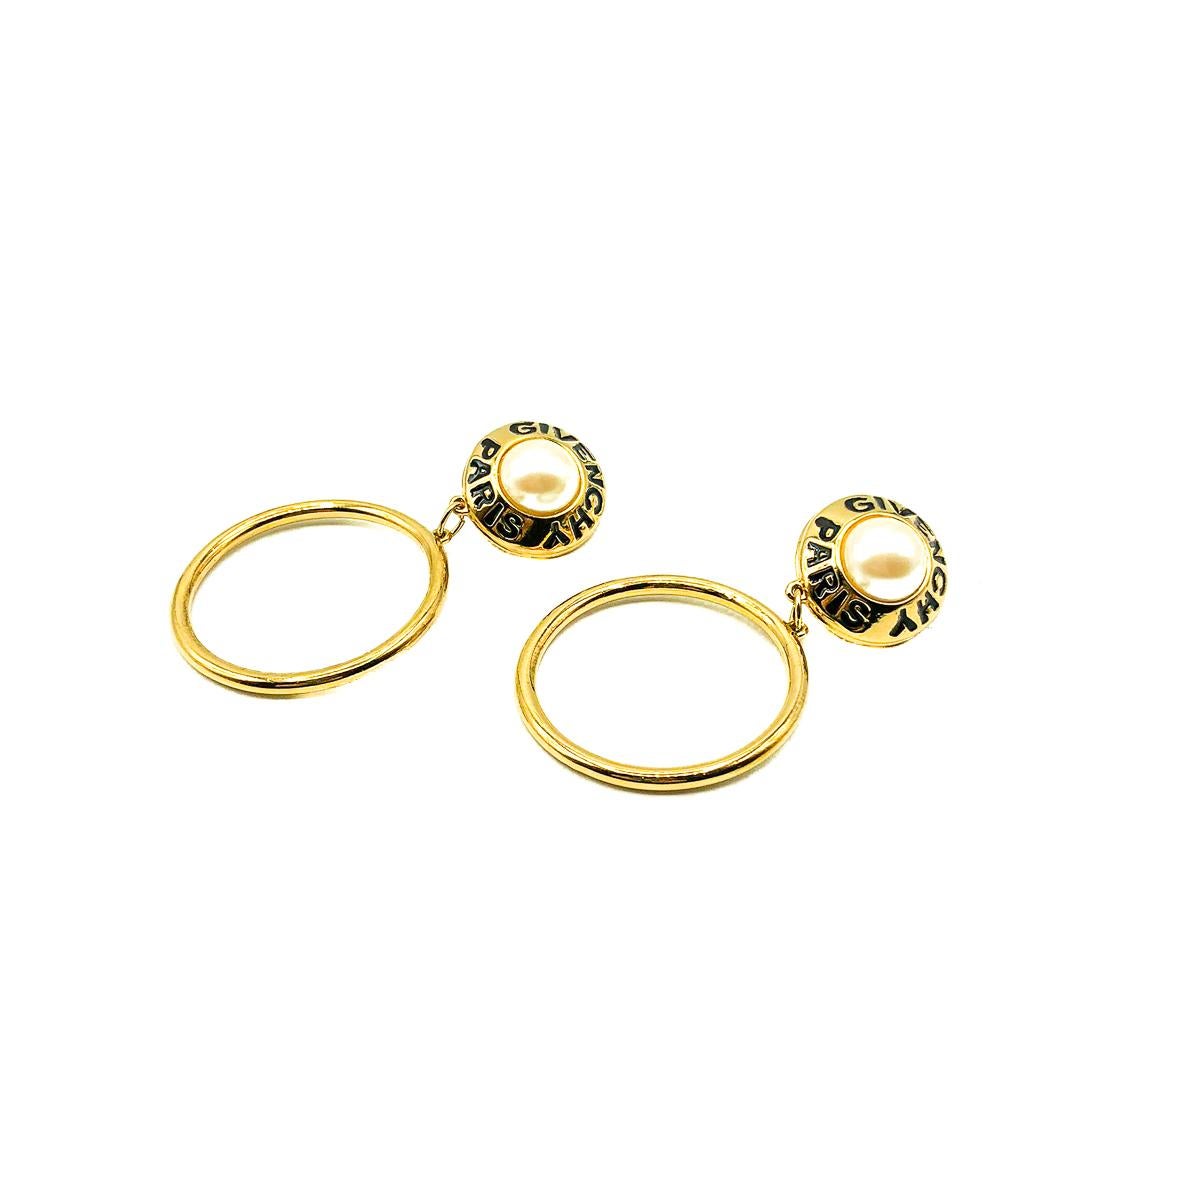 A pair of the most spectacular Vintage Givenchy Logo Hoop Earrings. Crafted in gold plated metal, black enamel and glass pearls. Featuring a lustrous pearl top surrounded by the iconic Givenchy name in black and a large gold front-facing hoop drop.